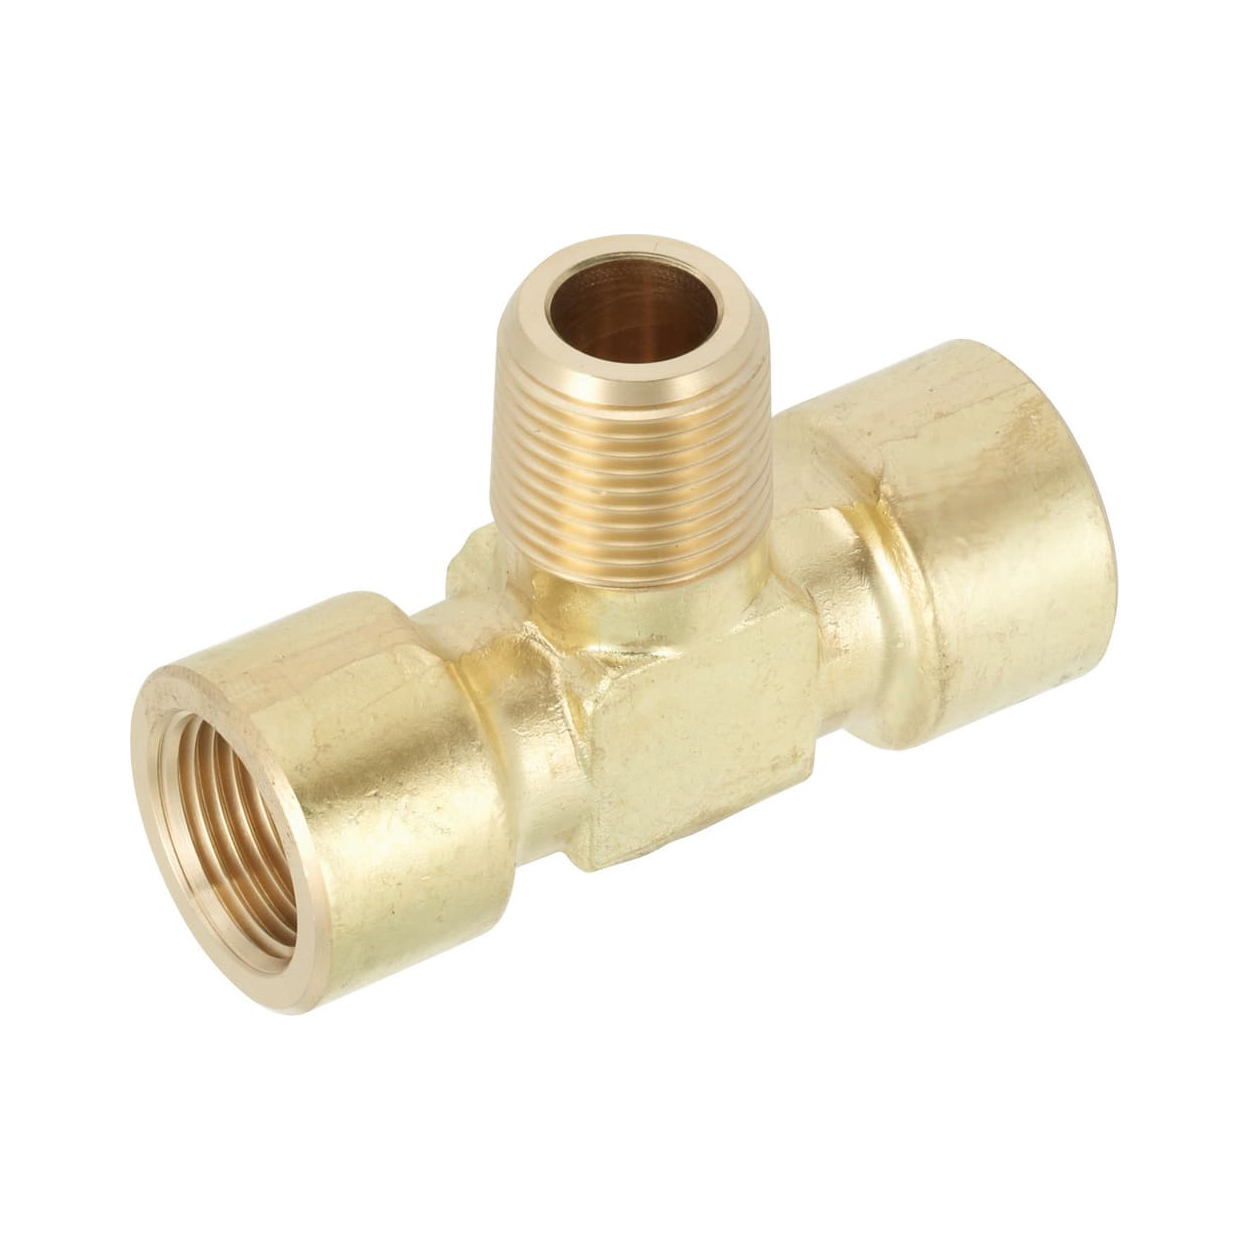 Brass Fittings for Steel Pipe/Tee/Threaded/Tapped